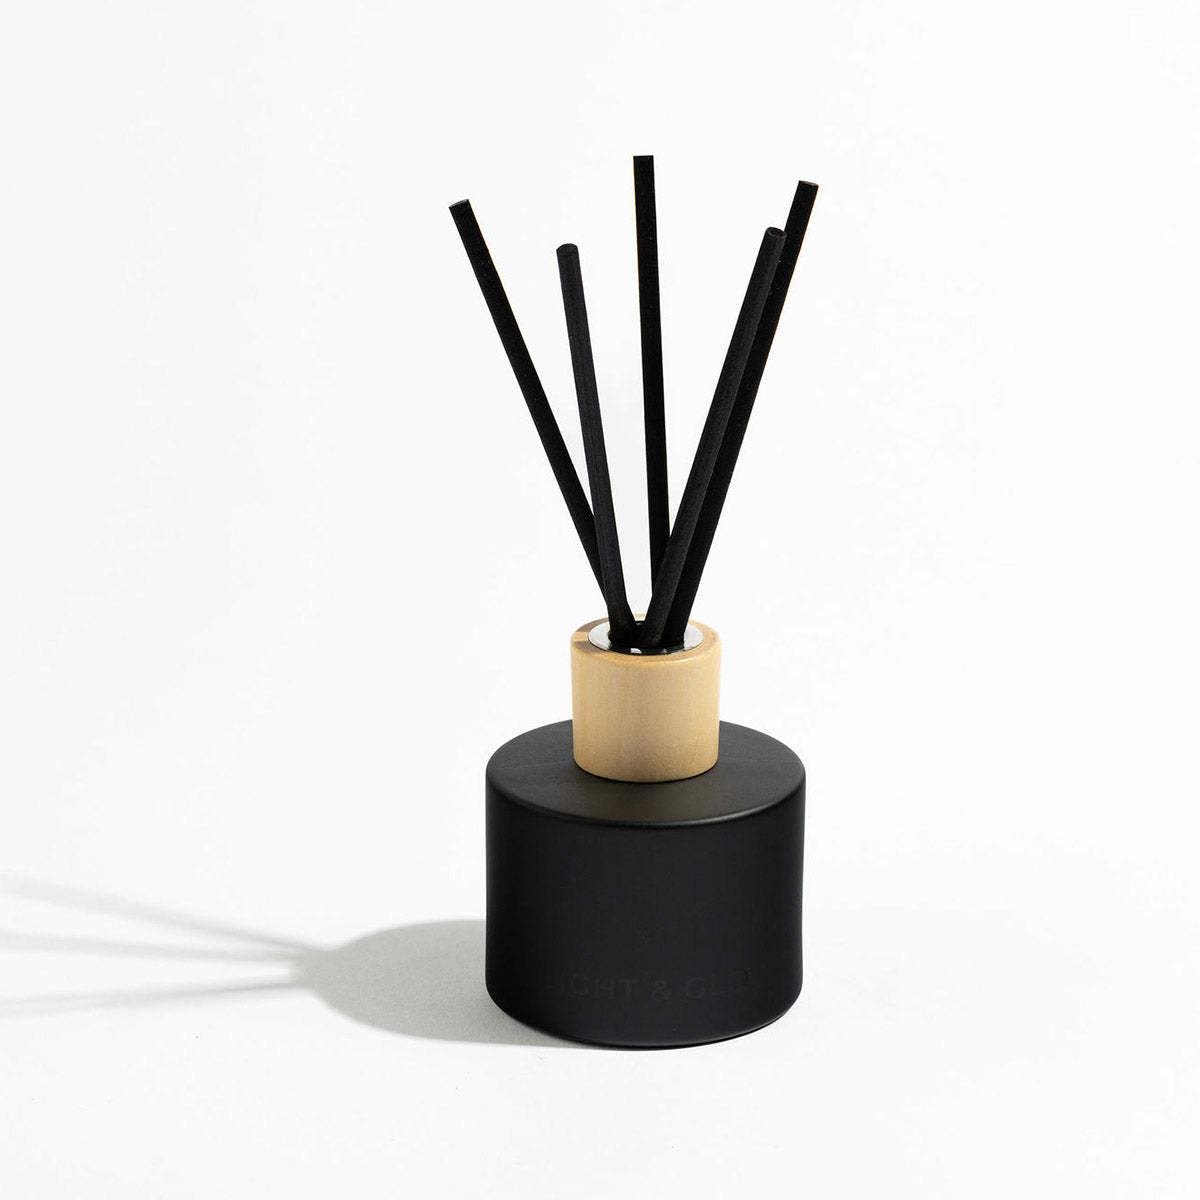 Lemongrass & Persian Lime - Monochrome Scent Diffuser | Luxury Candles & Home Fragrances by Light + Glo